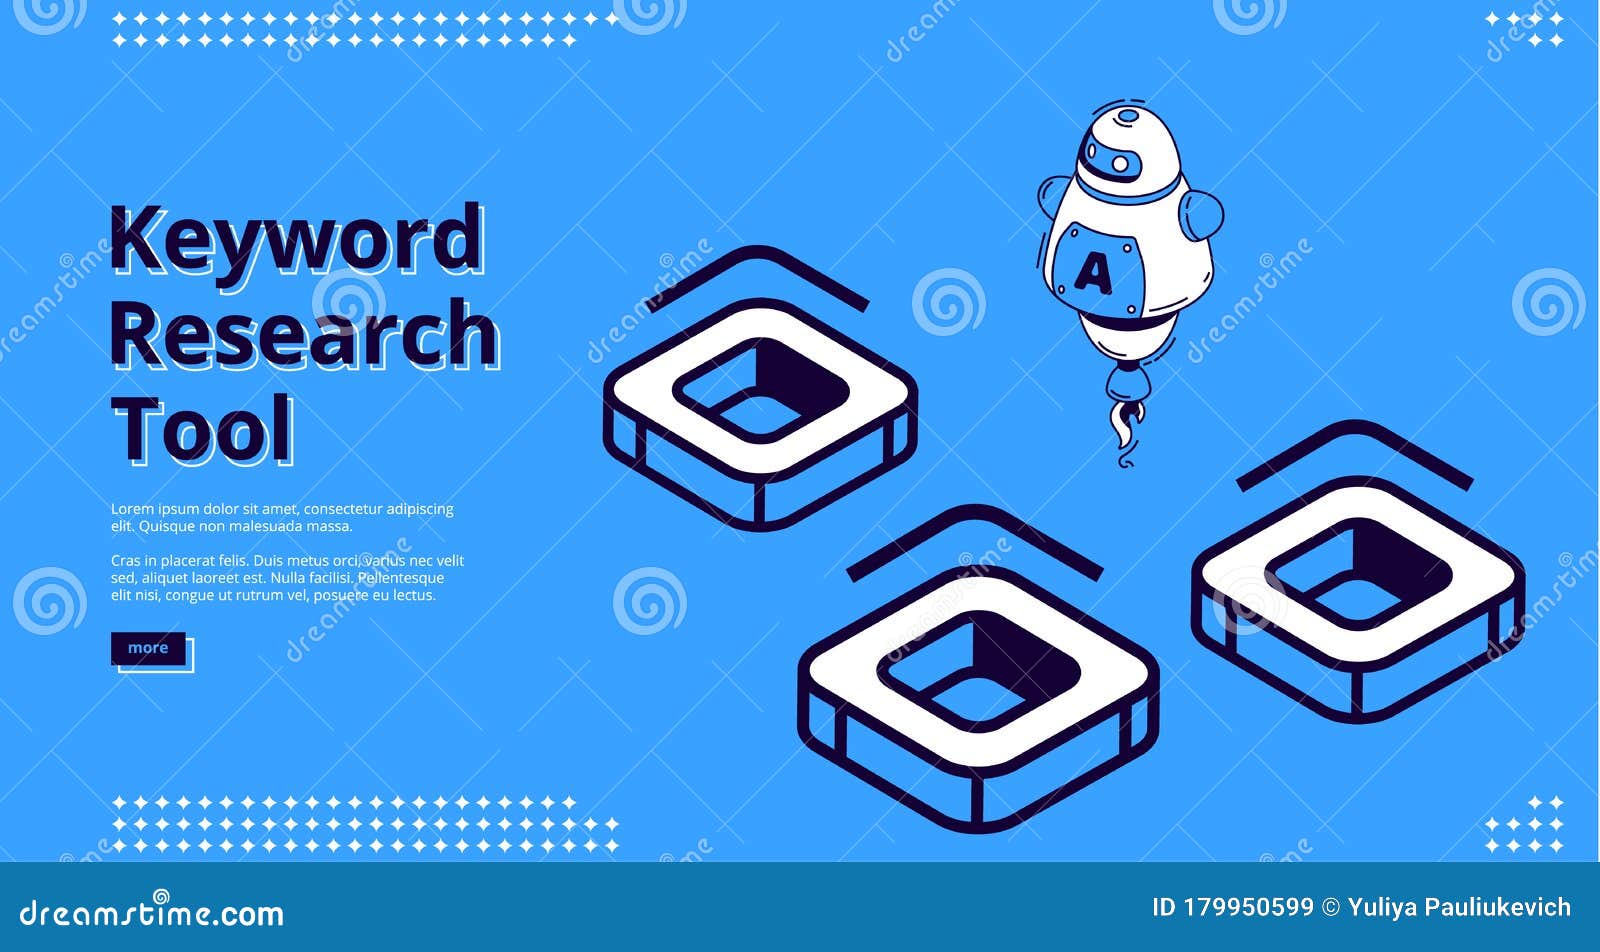 Keyword Research Tool Banner With Isometric Icons Stock Vector Illustration Of Data Chat